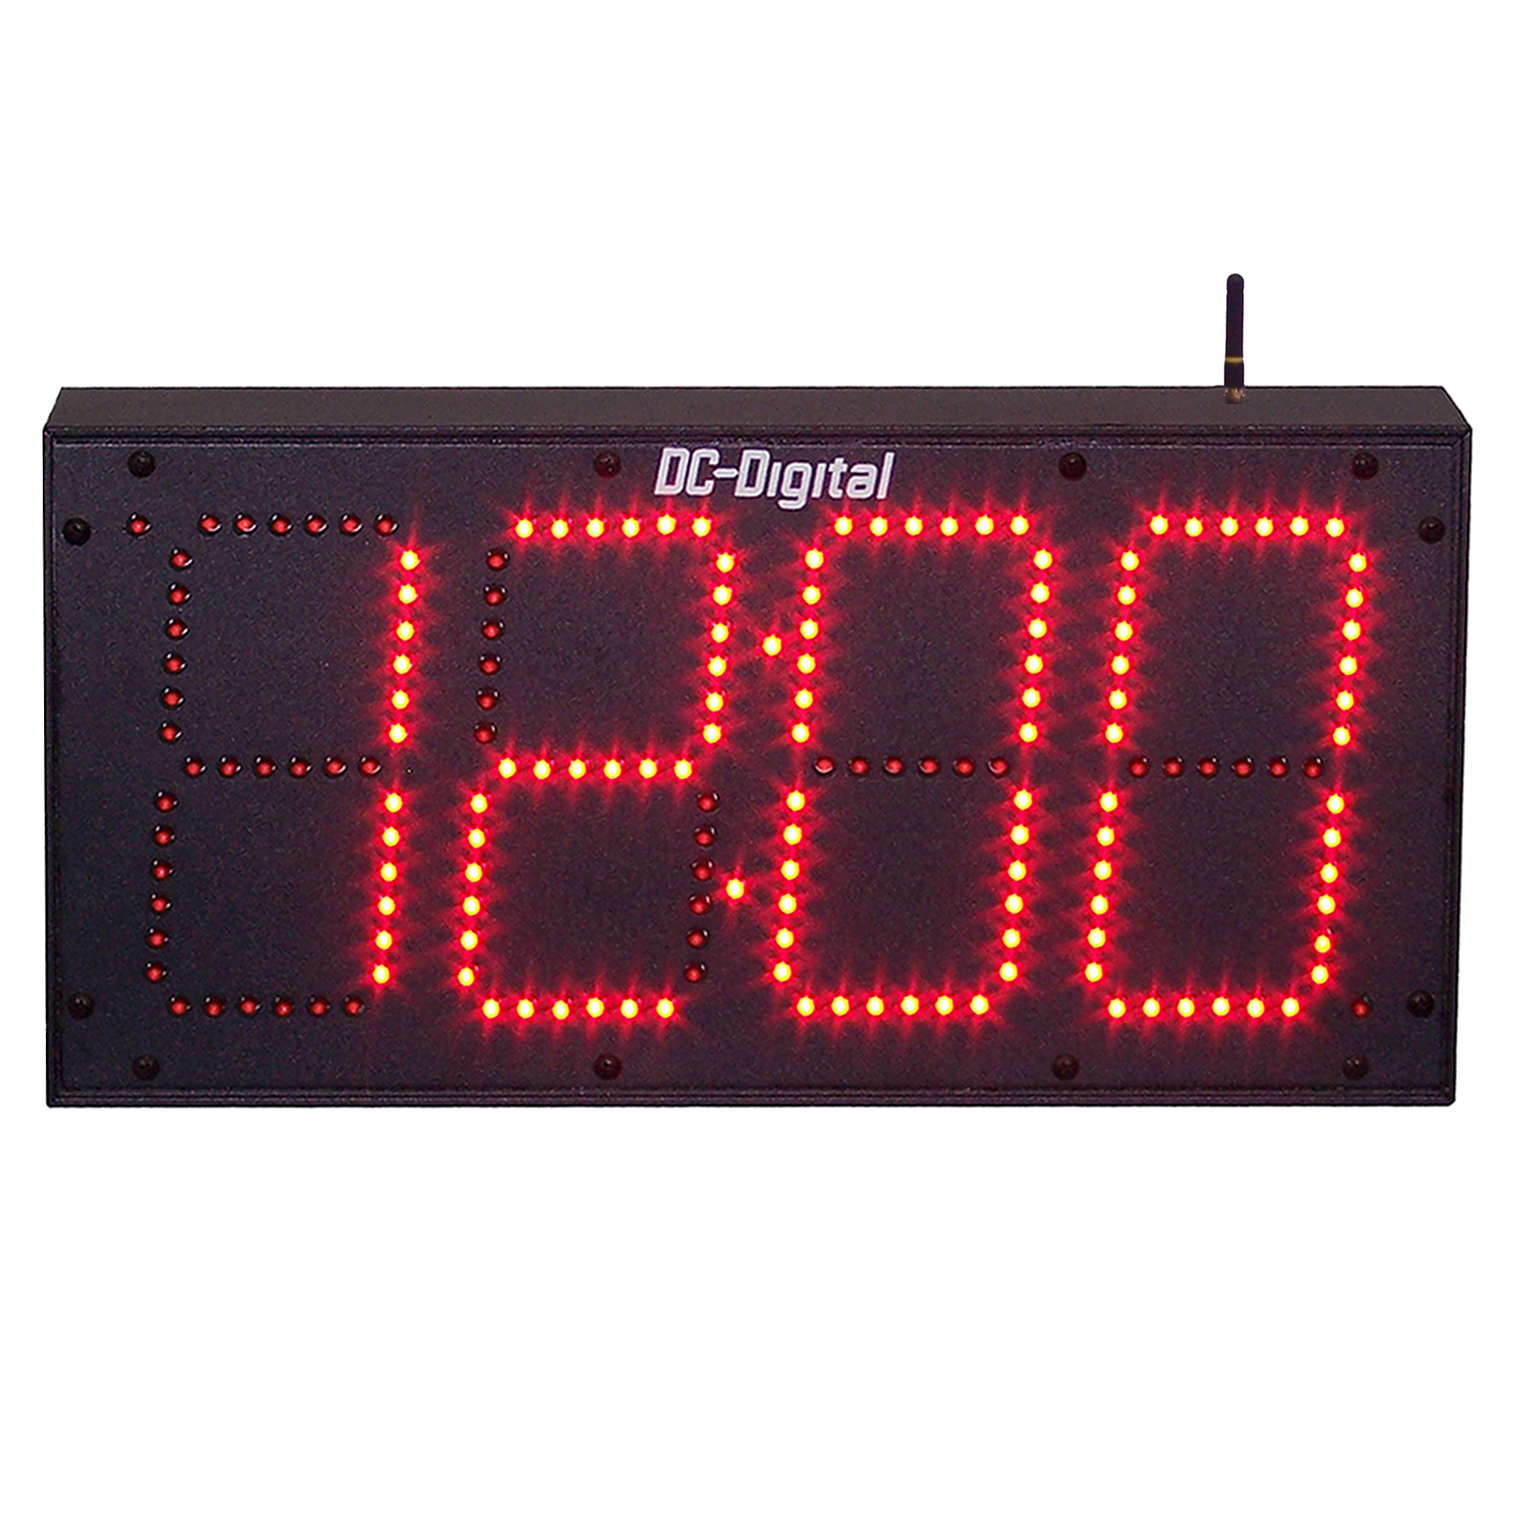 (DC-60-W-System-IN) 6.0 Inch LED Digital, RF-Wireless Synchronized System, Time of Day Clock, with Store and Forward (INDOOR)